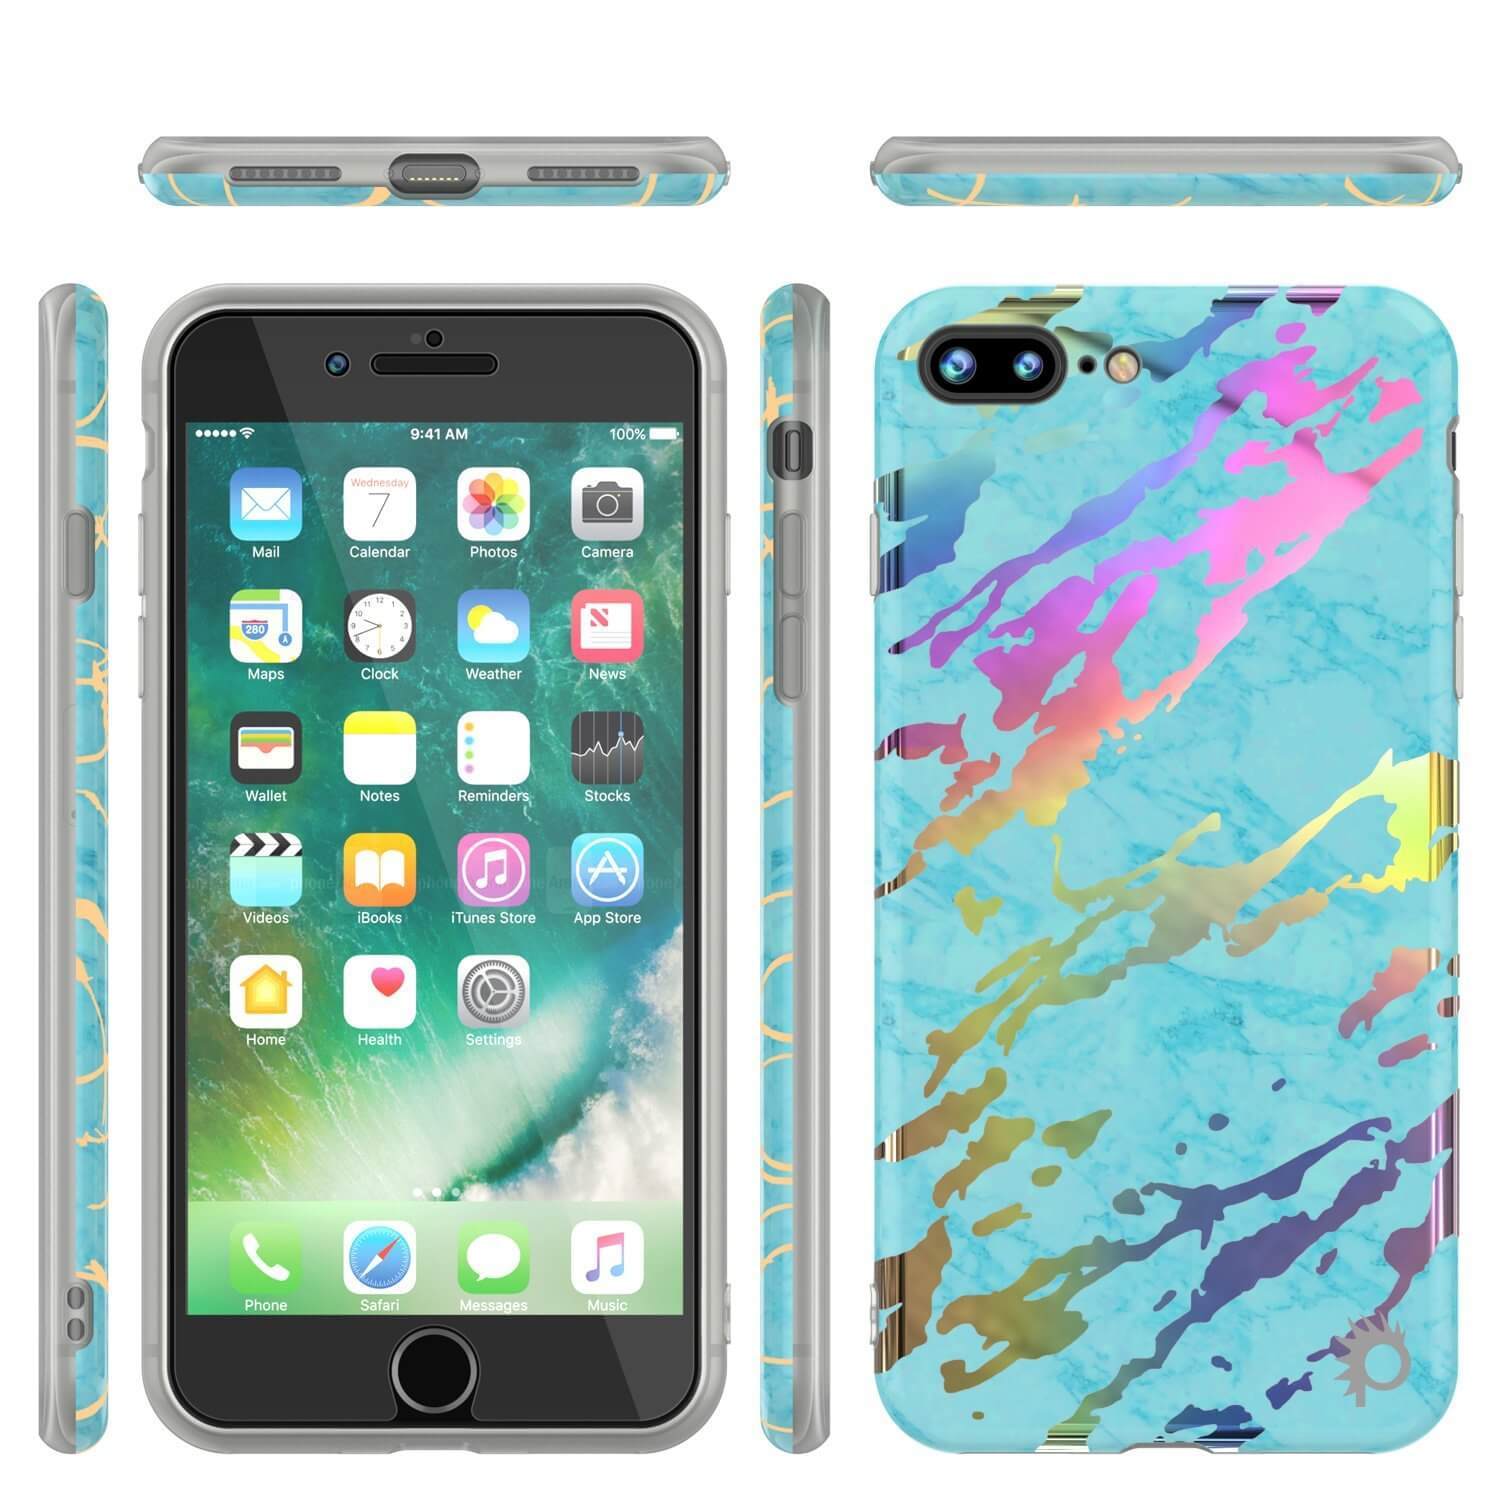 Punkcase iPhone 8+ / 7+ Plus Marble Case, Protective Full Body Cover W/9H Tempered Glass Screen Protector (Teal Onyx)